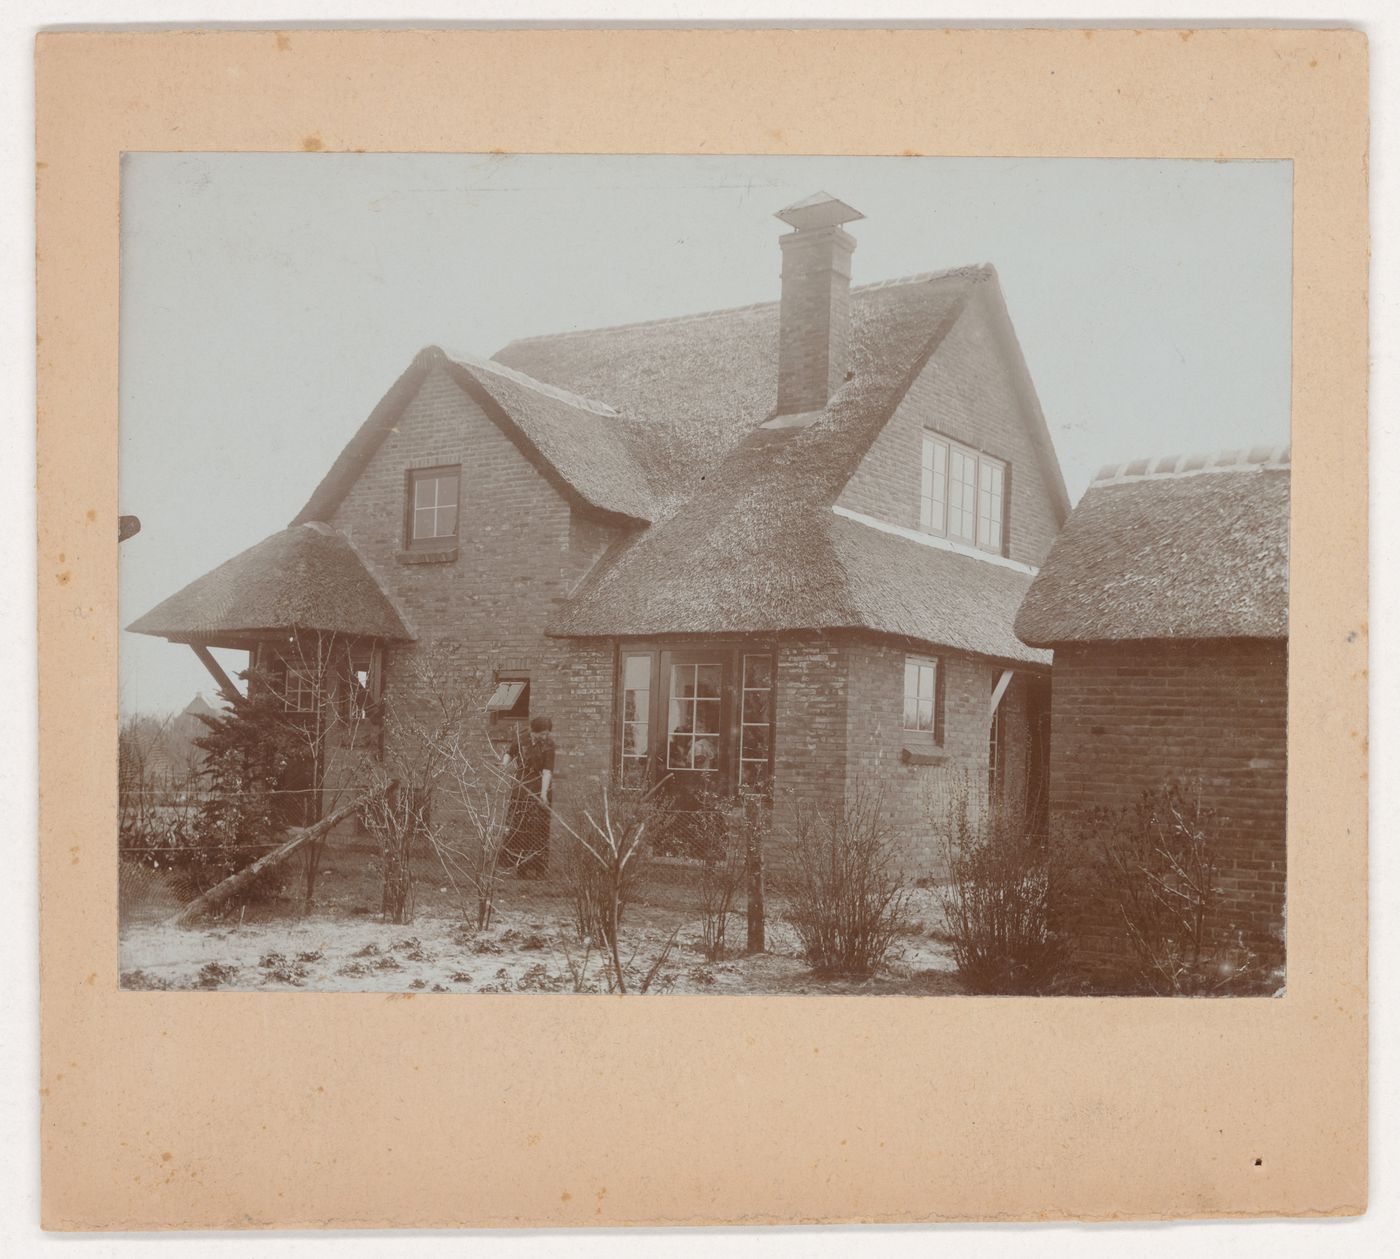 View of the lateral façade of the house for Mr. and Mrs. van Essen-Vincker from the garden, Blaricum, Netherlands